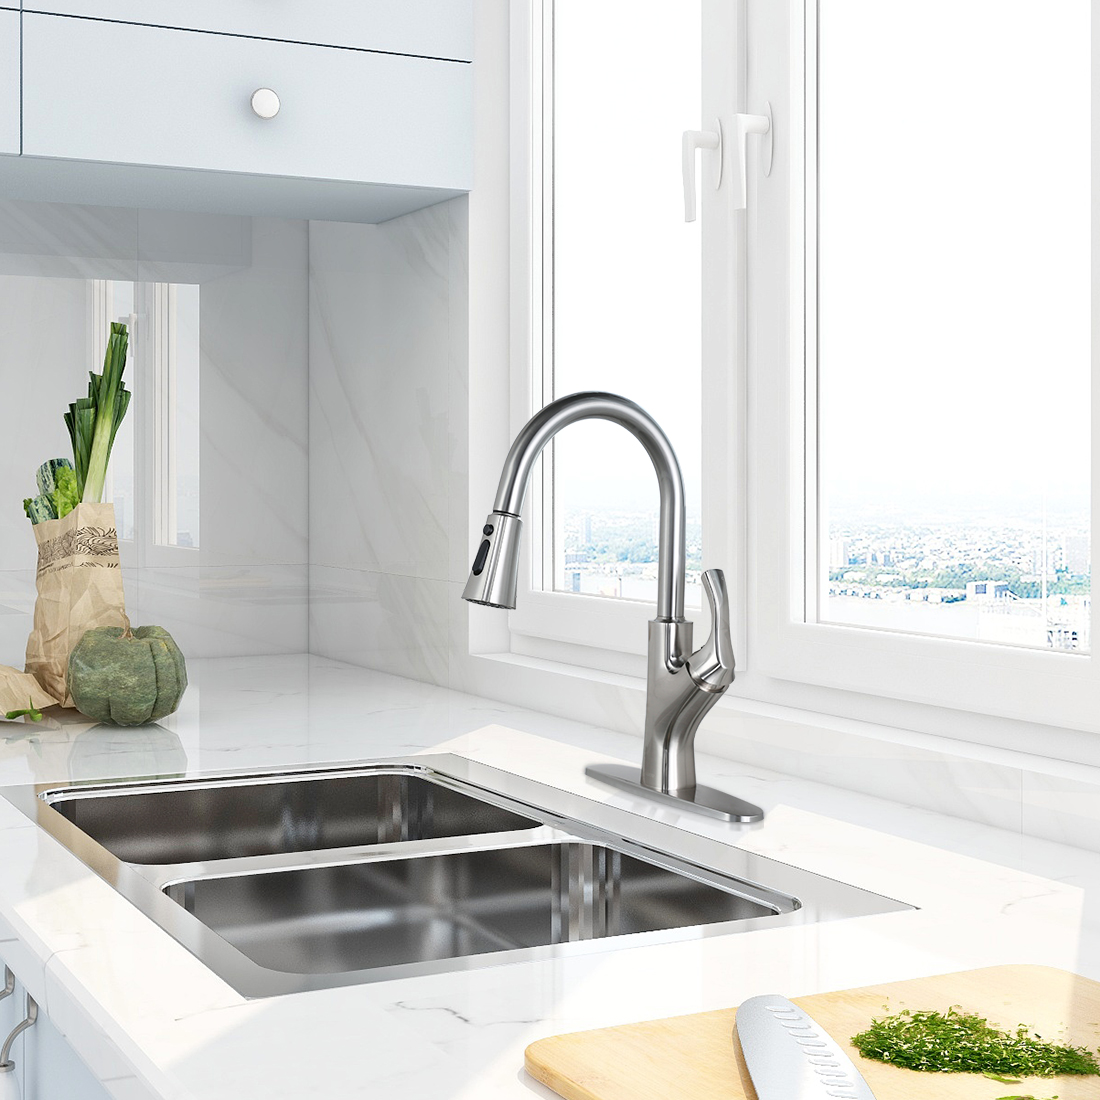 Three tips for choosing sanitary faucets